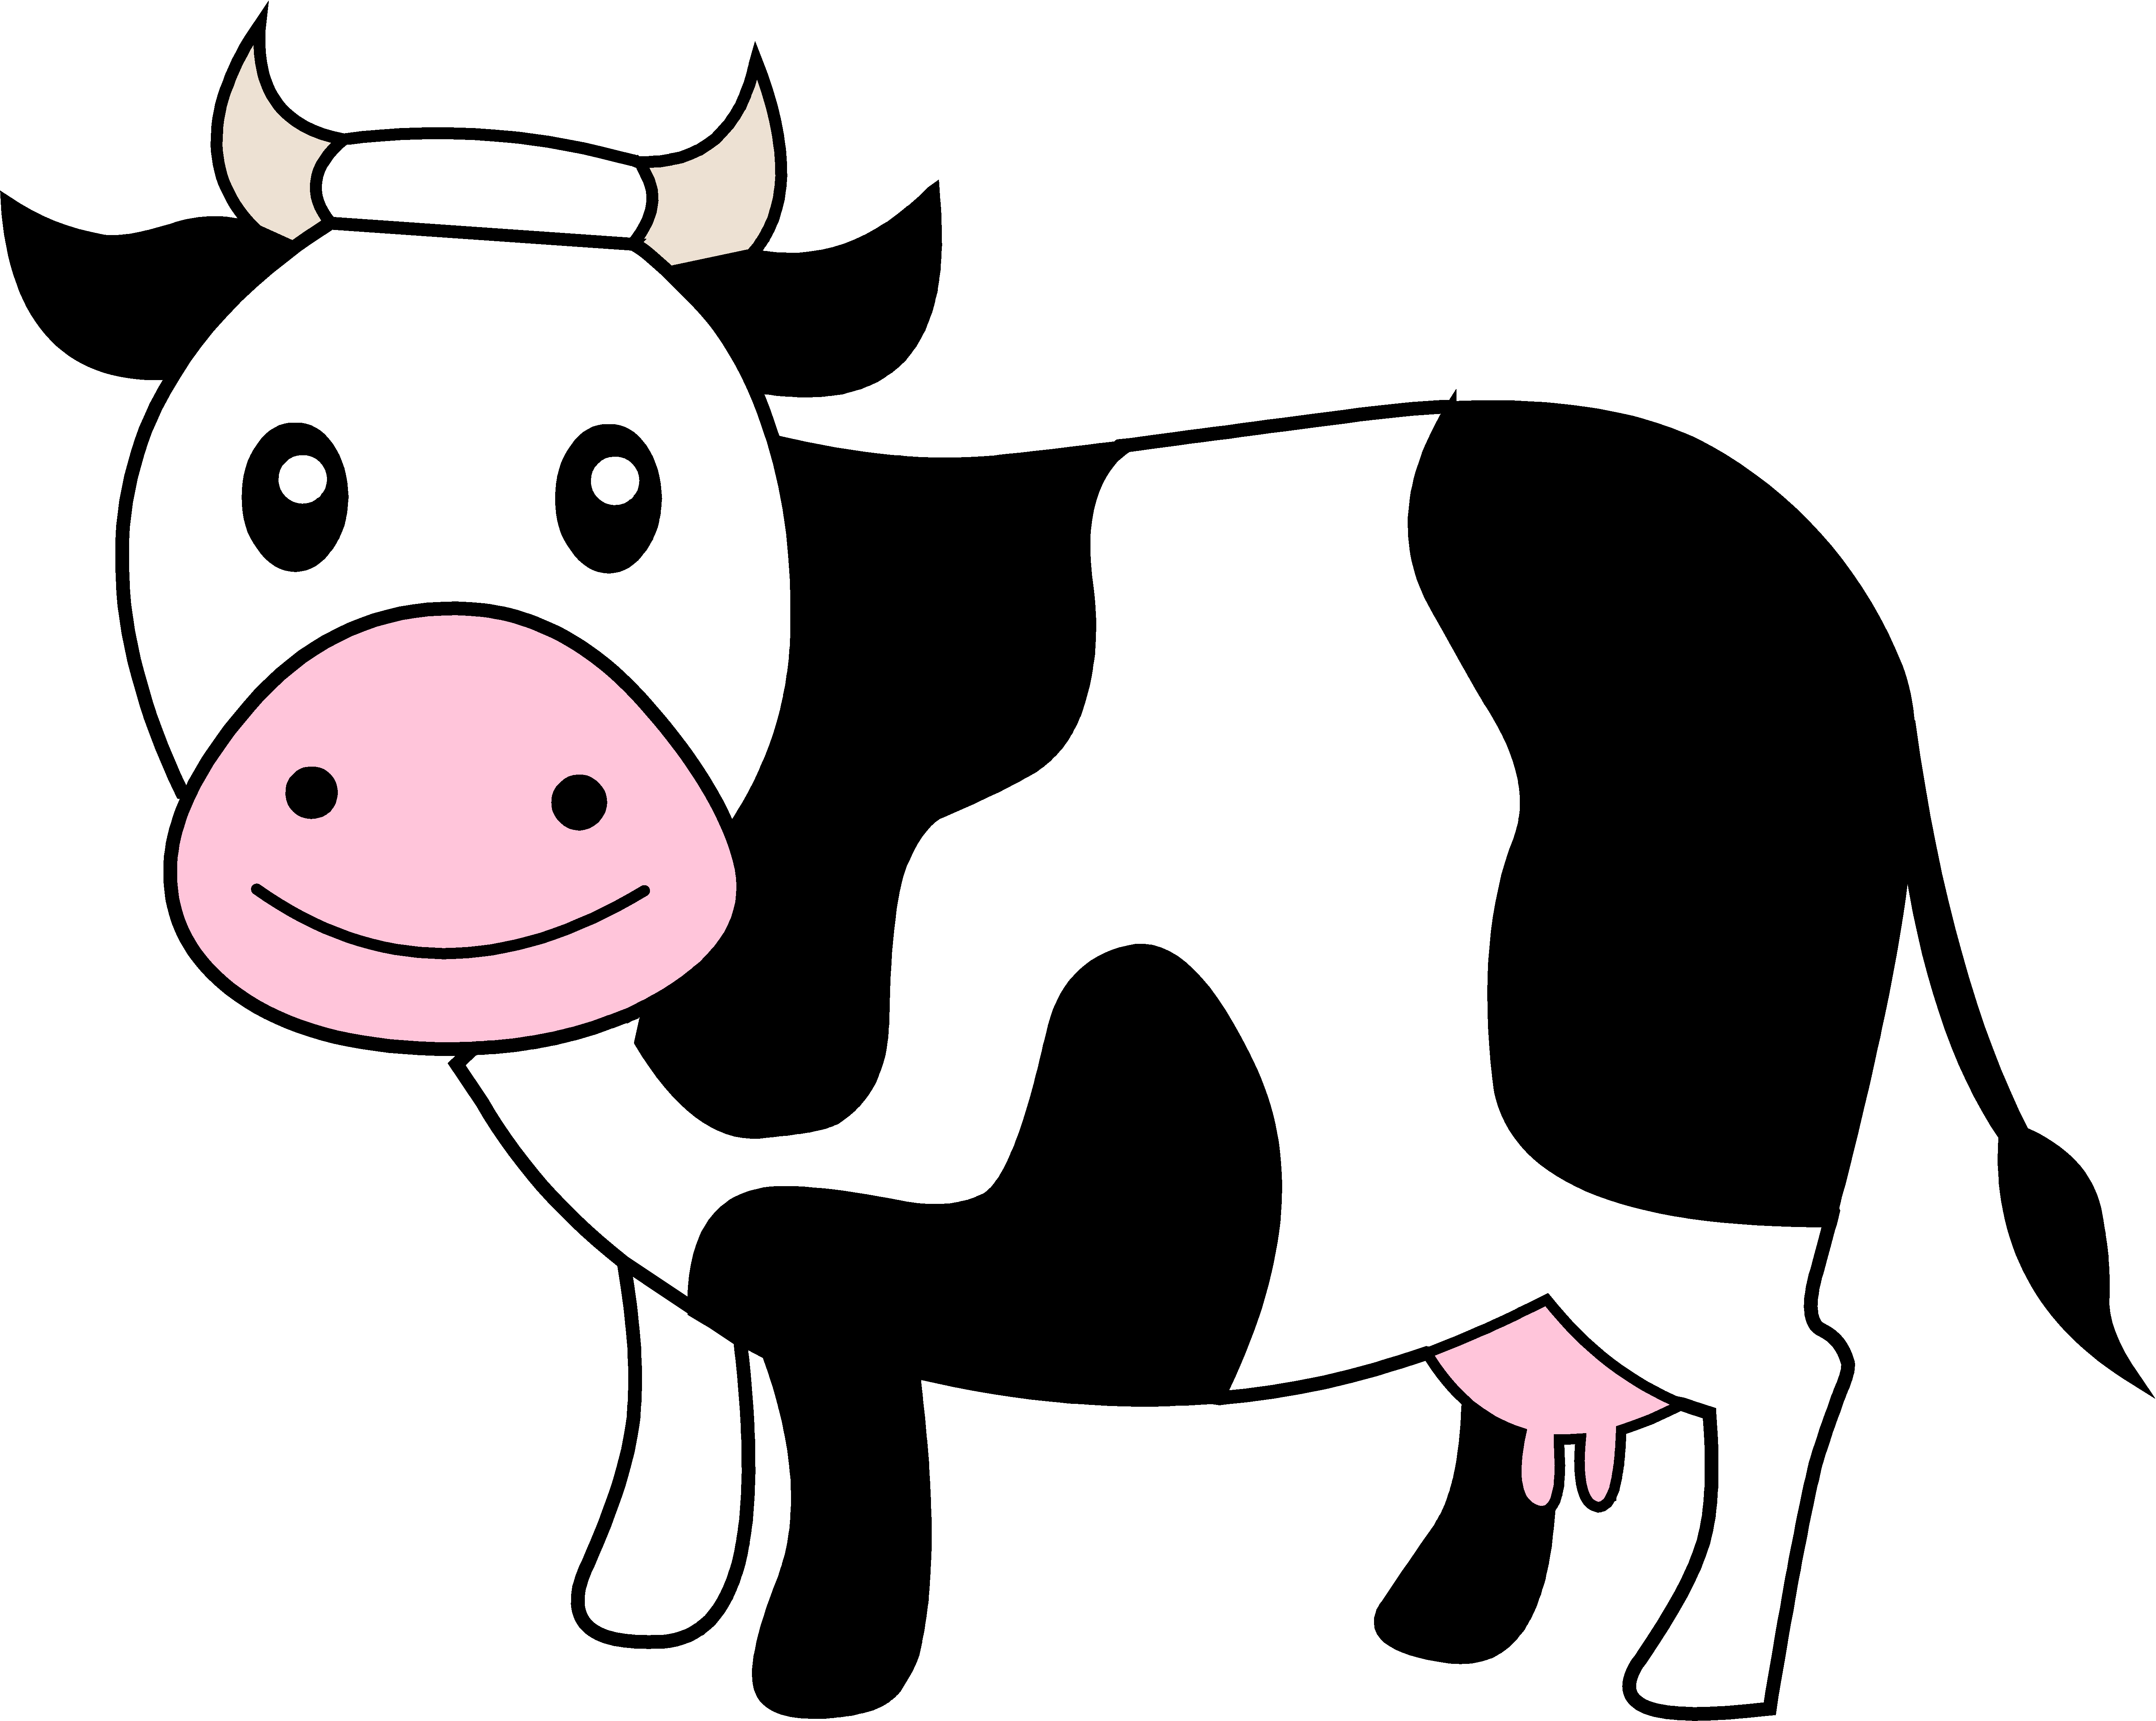 Images For > Cow Outline Clip Art